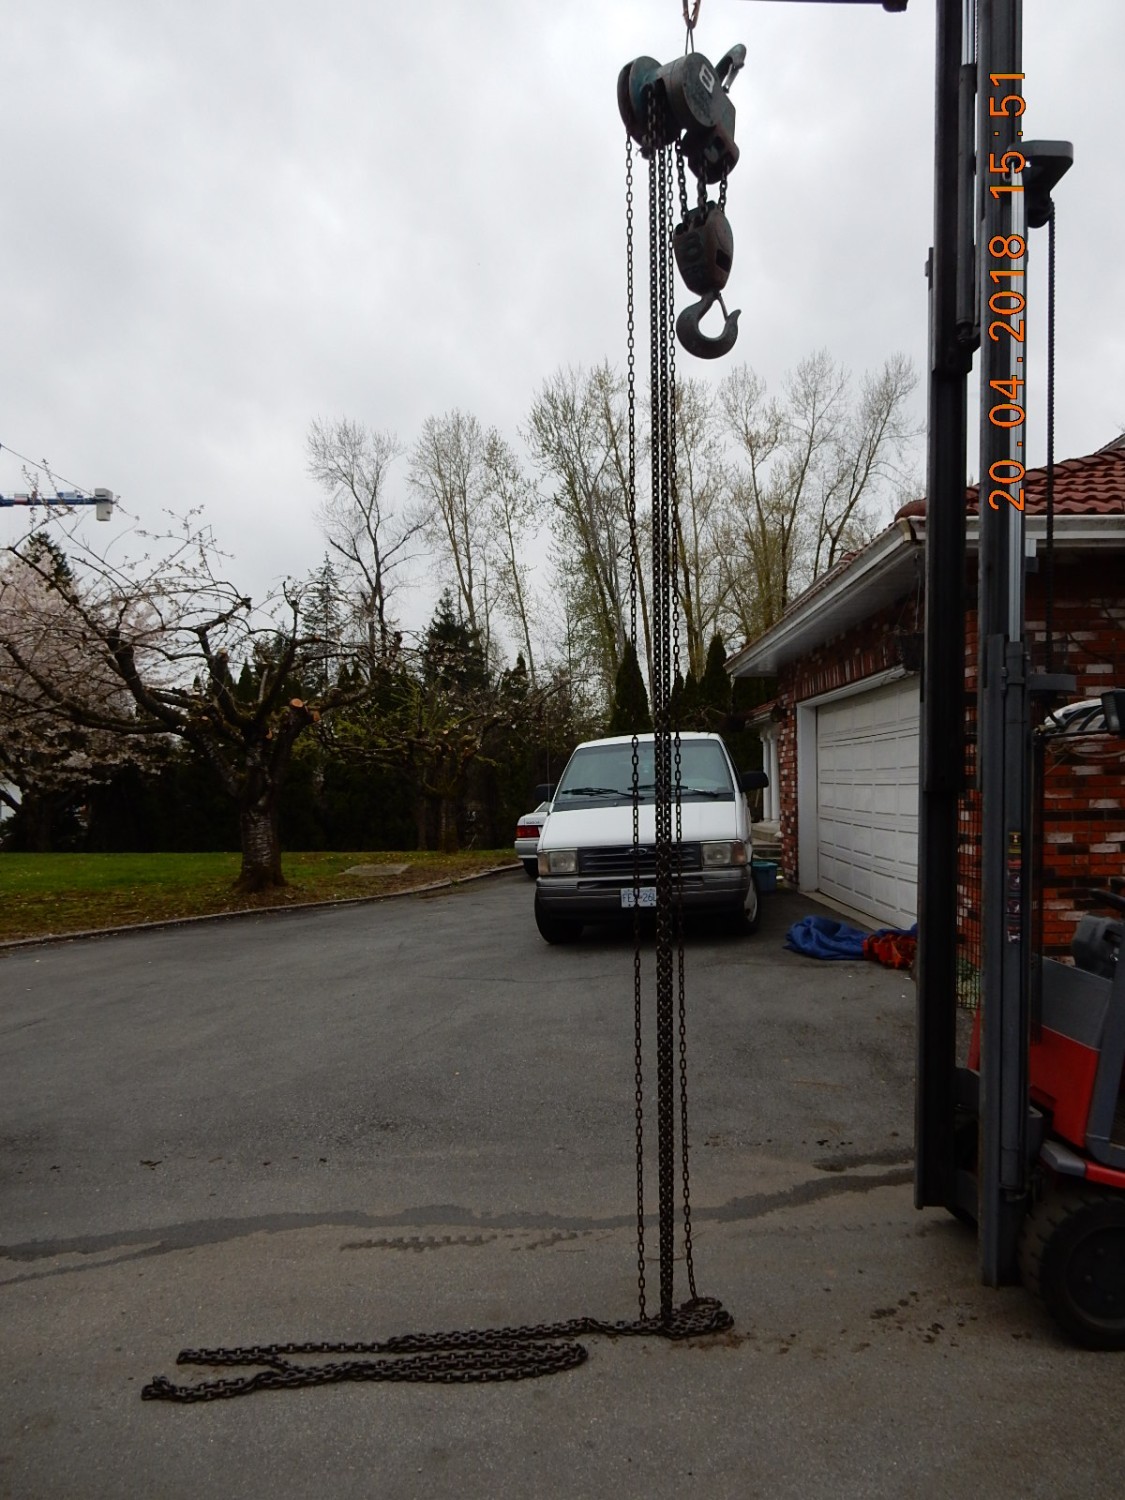 CM 4740 Alum 8 Ton 20 foot Cyclone Hand Chain Hoist Hook Mounted  1 - 8 TON UNIT TAKE FOR $800.00